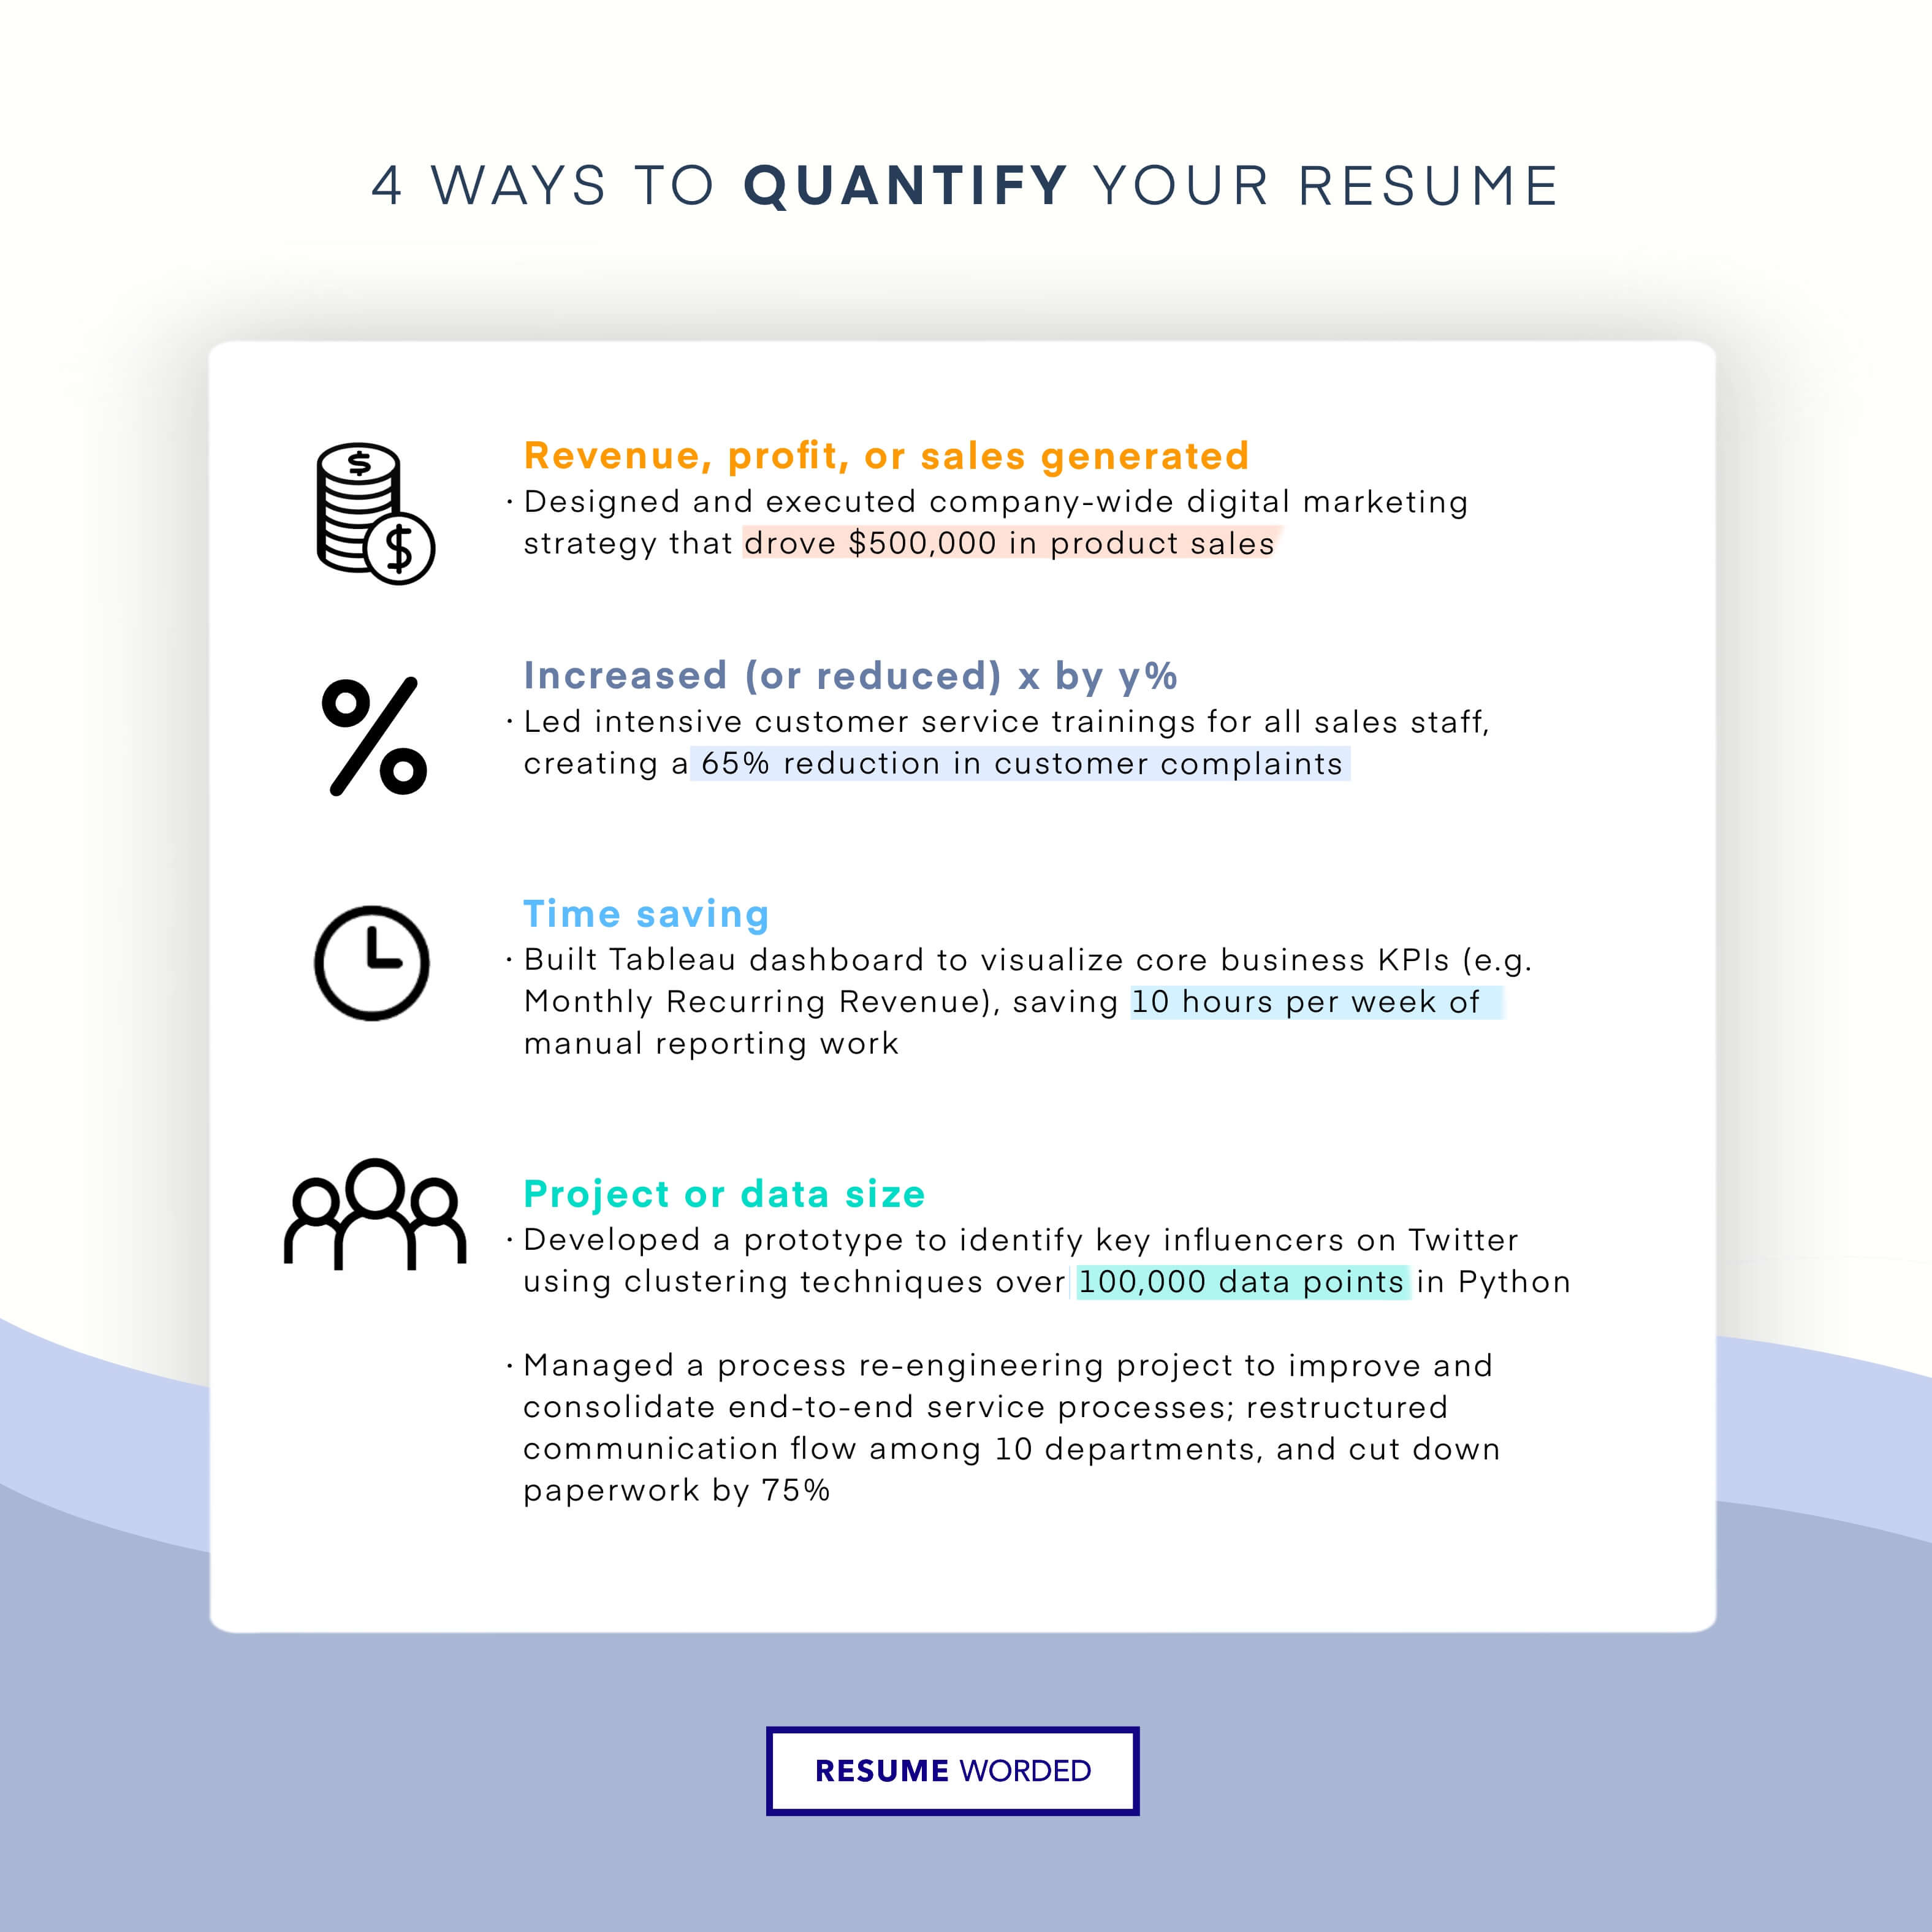 Quantify your achievements - Customer Success Analyst Resume